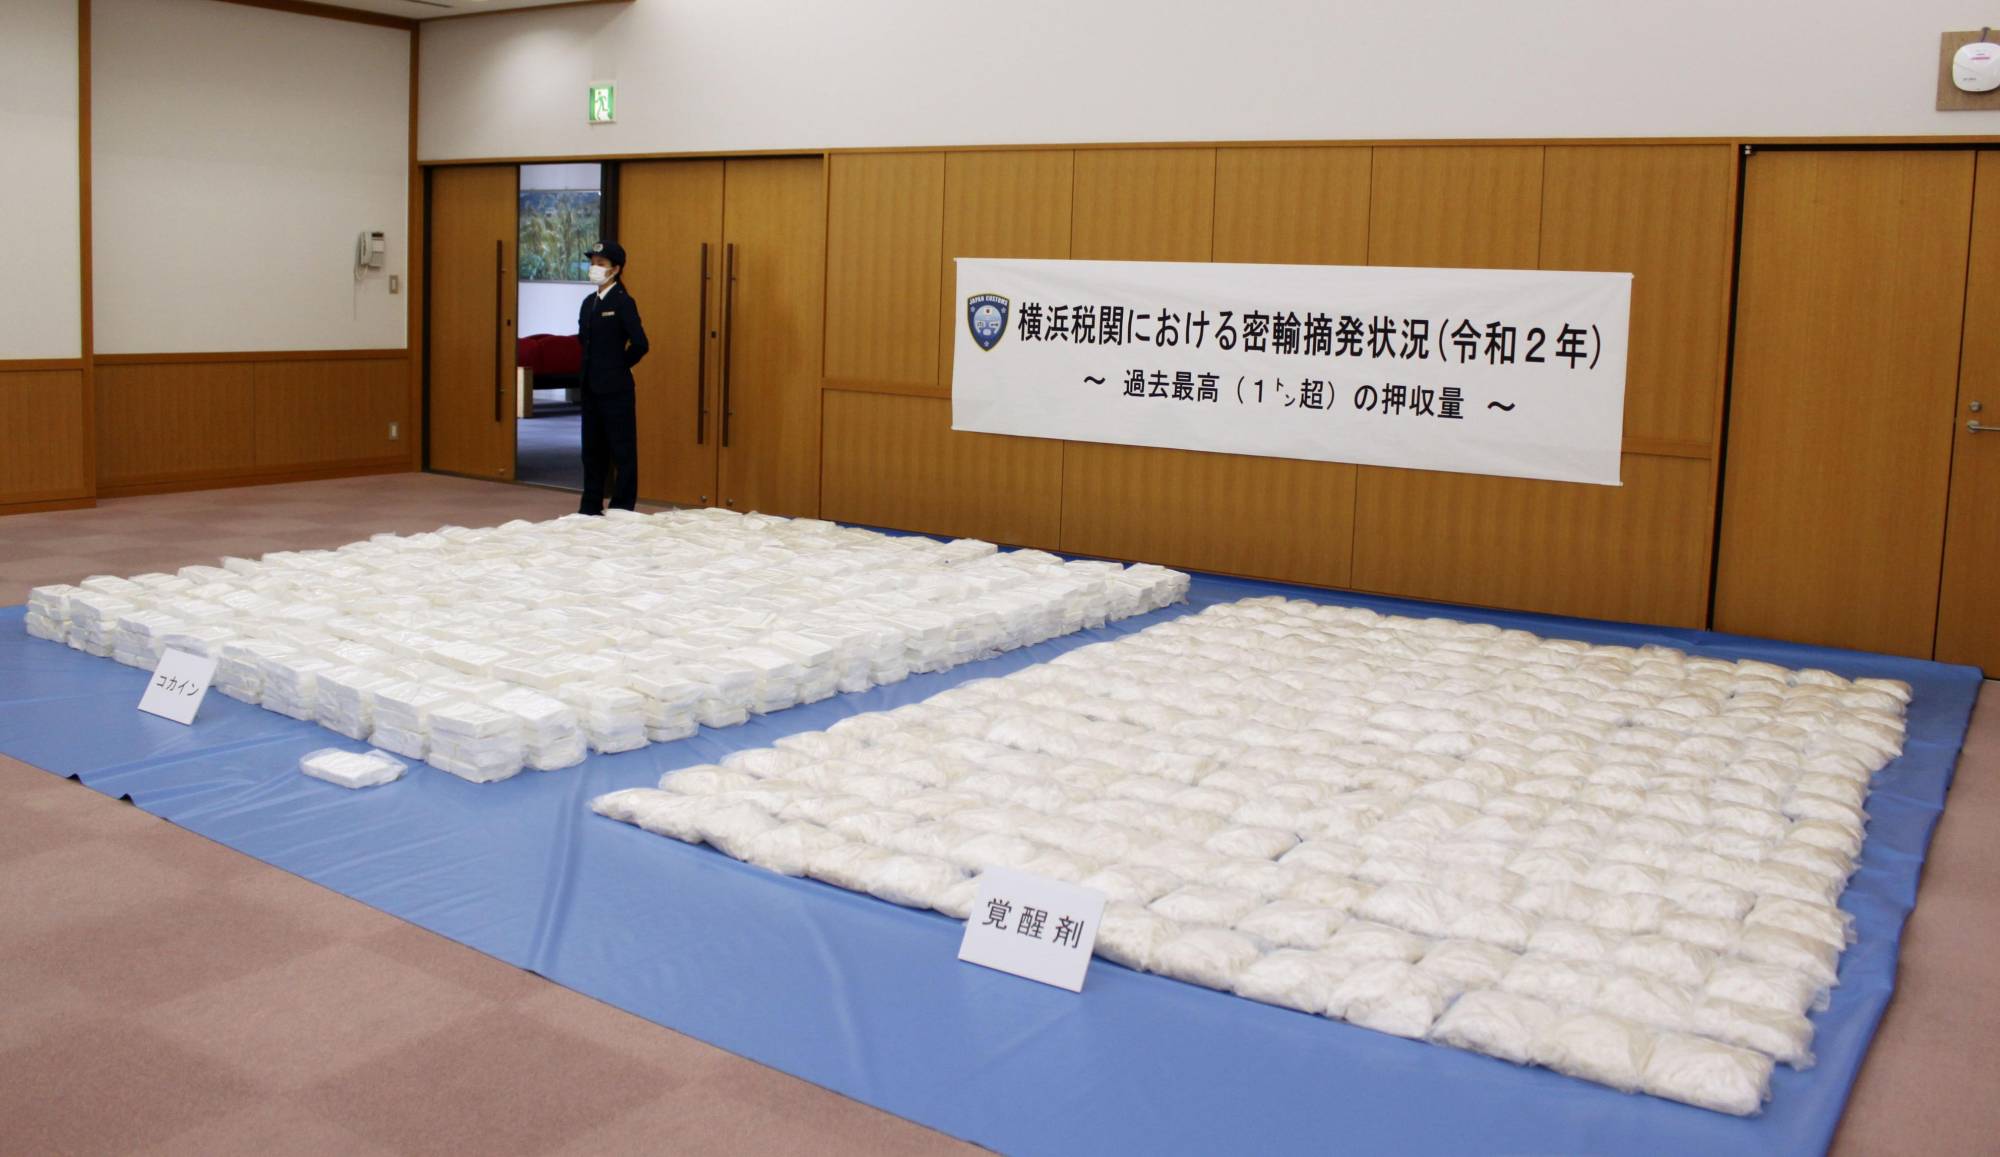 The amount of illegal drugs seized by Japanese customs in 2020 dropped 43% from the previous year. | KYODO